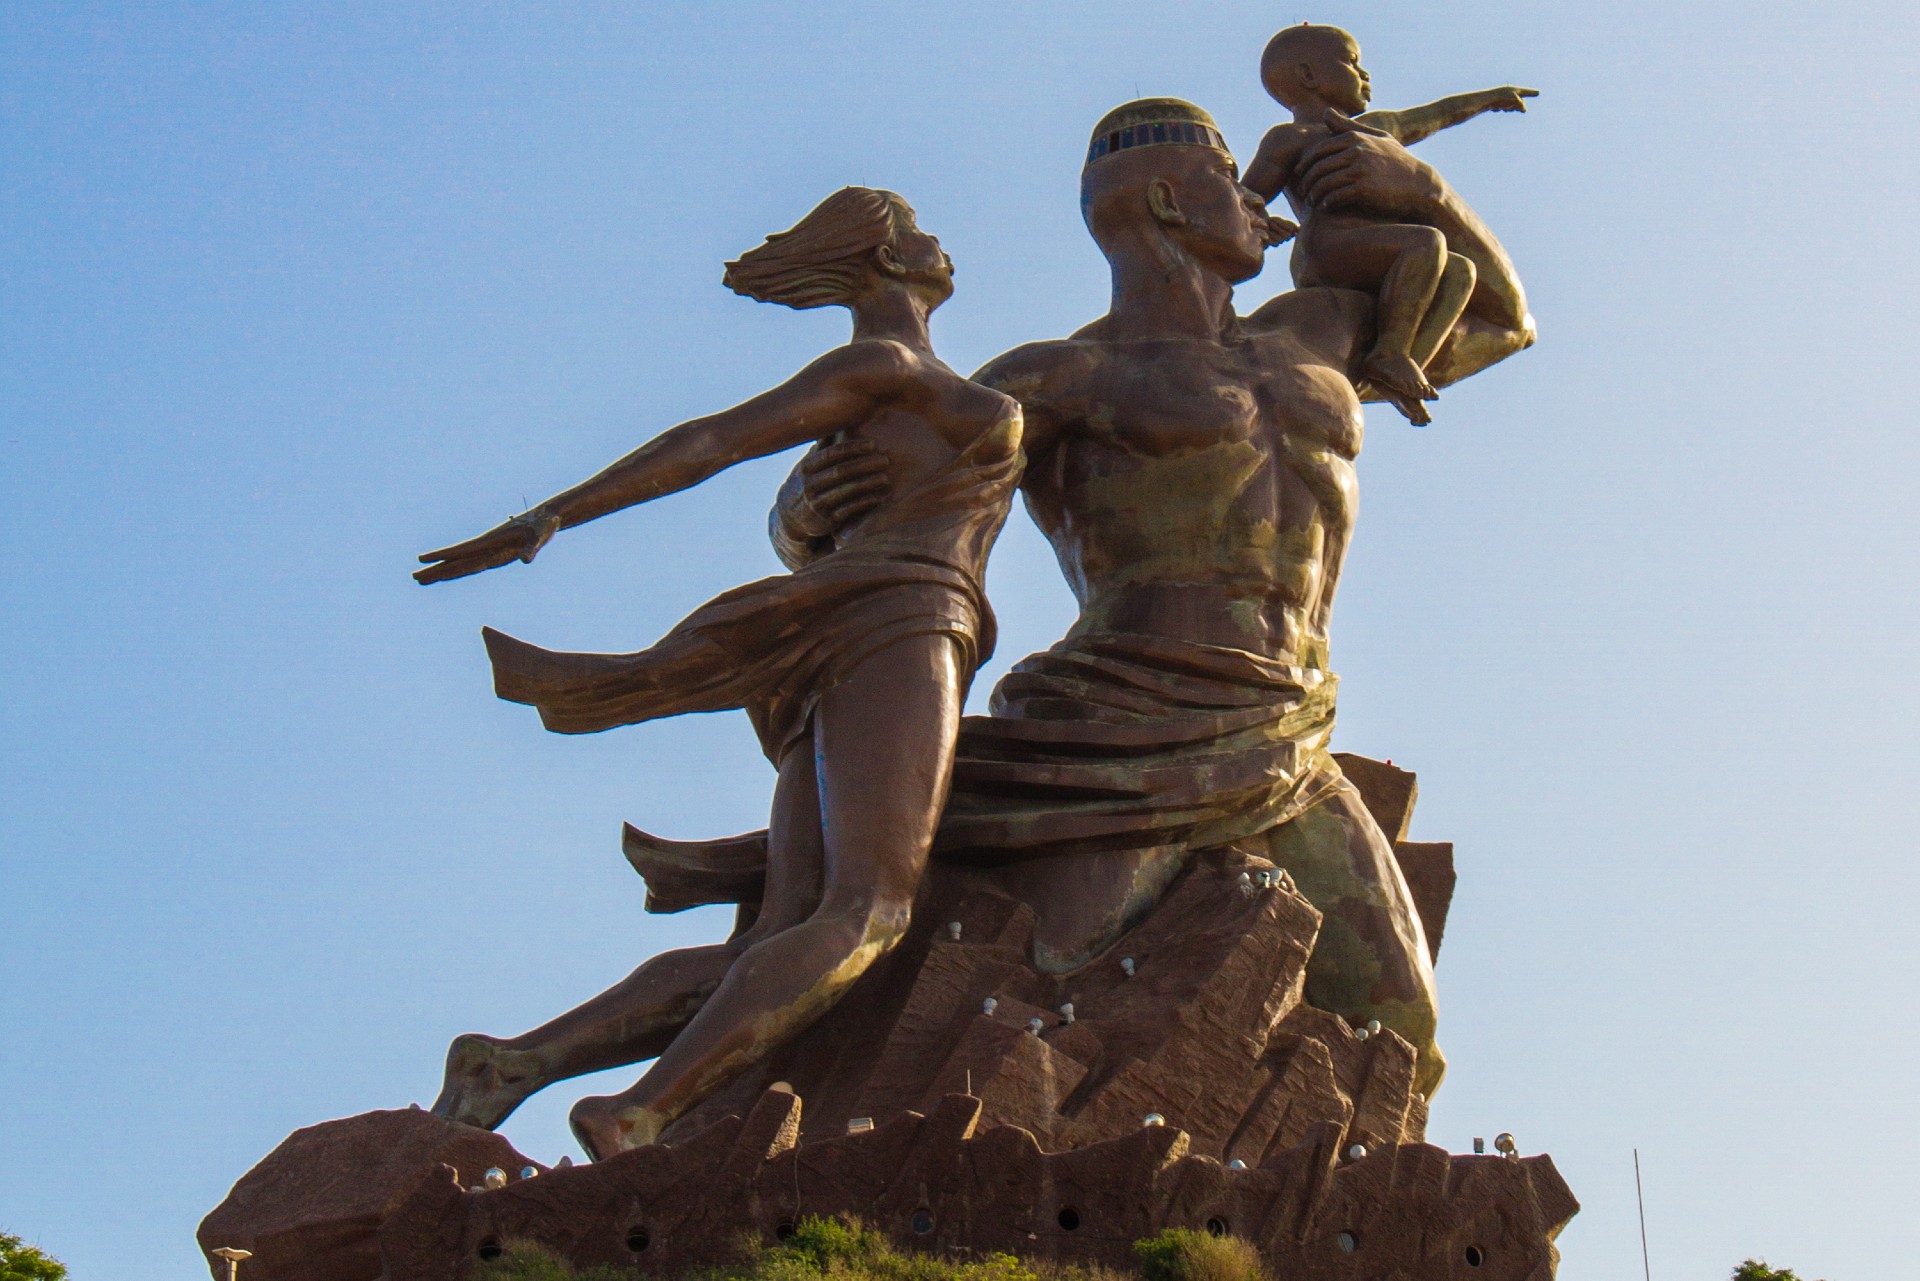 A photo of the African renaissance monument in Senegal